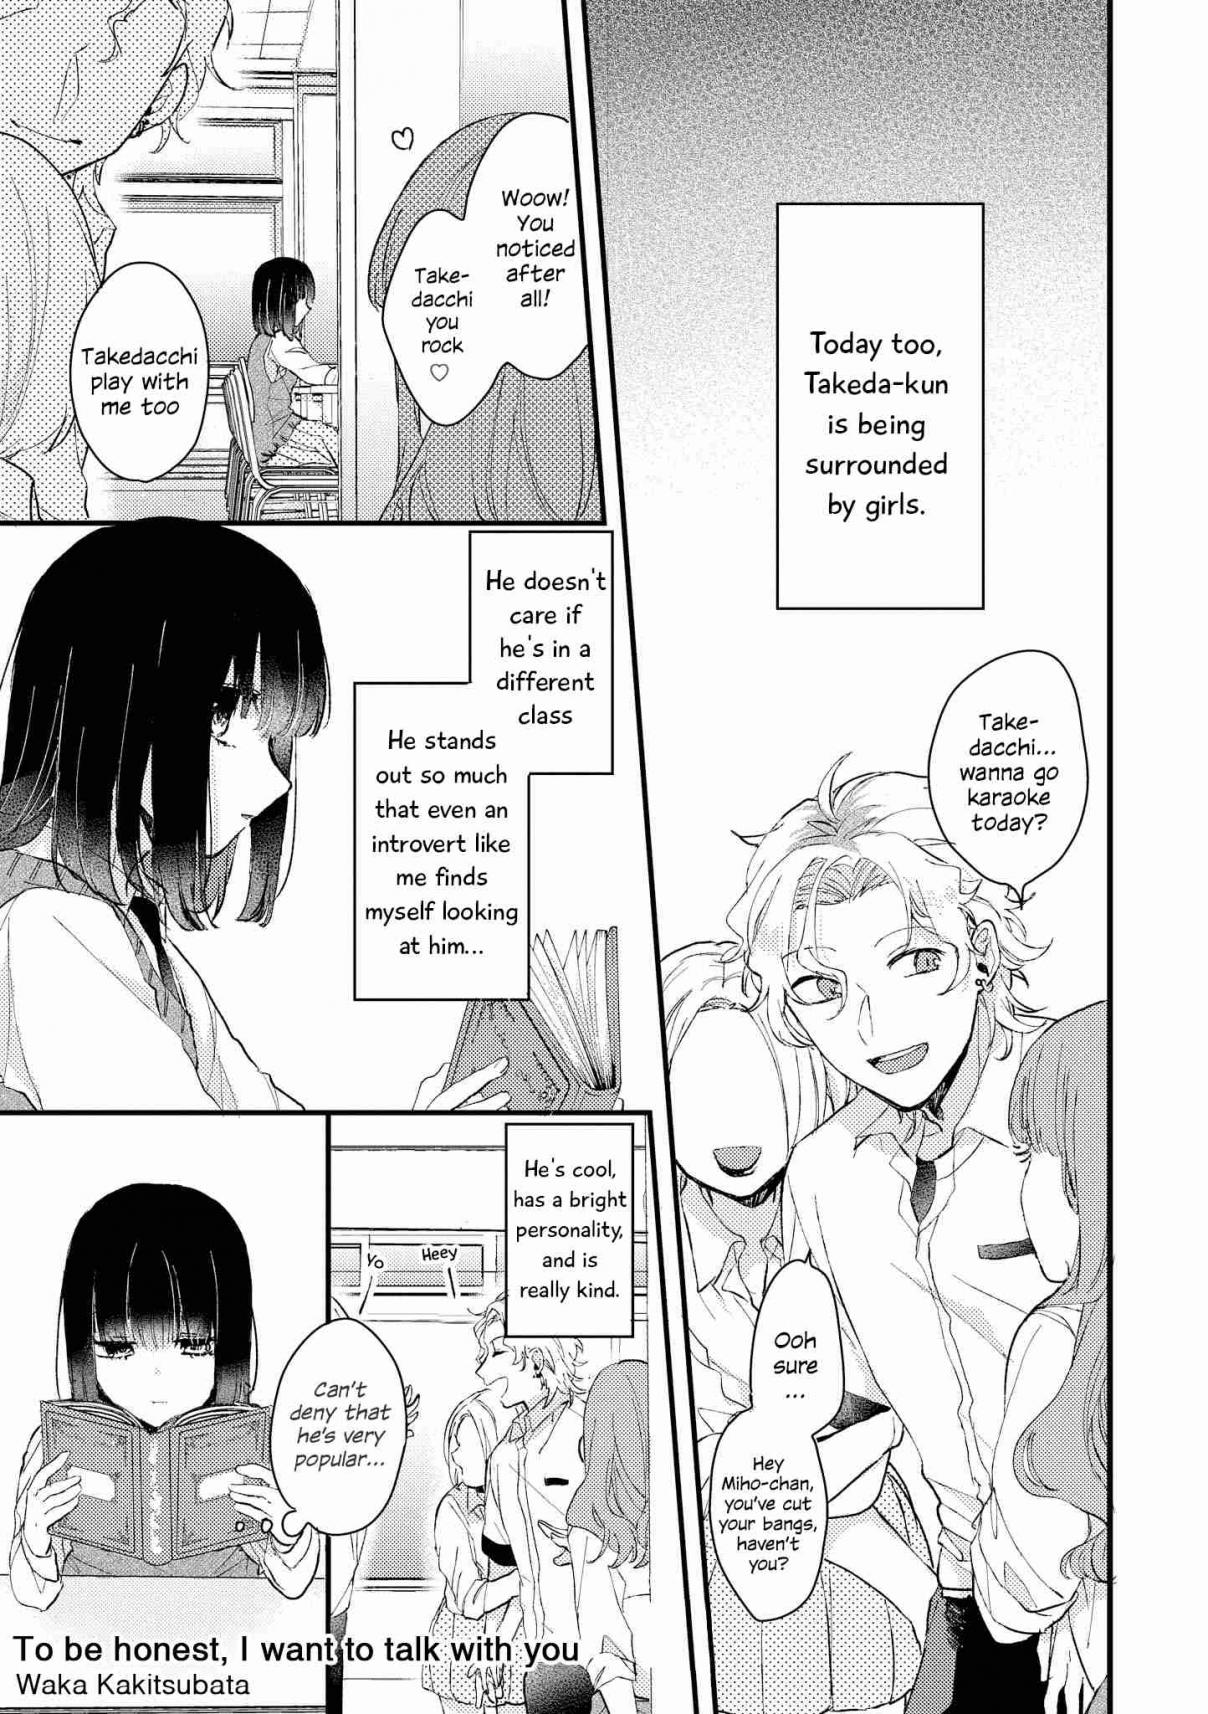 “It’s too precious and hard to read !!” 4P Short Stories Vol. 1 Ch. 2 To be honest, I want to talk with you [by Waka Kakitsubata]